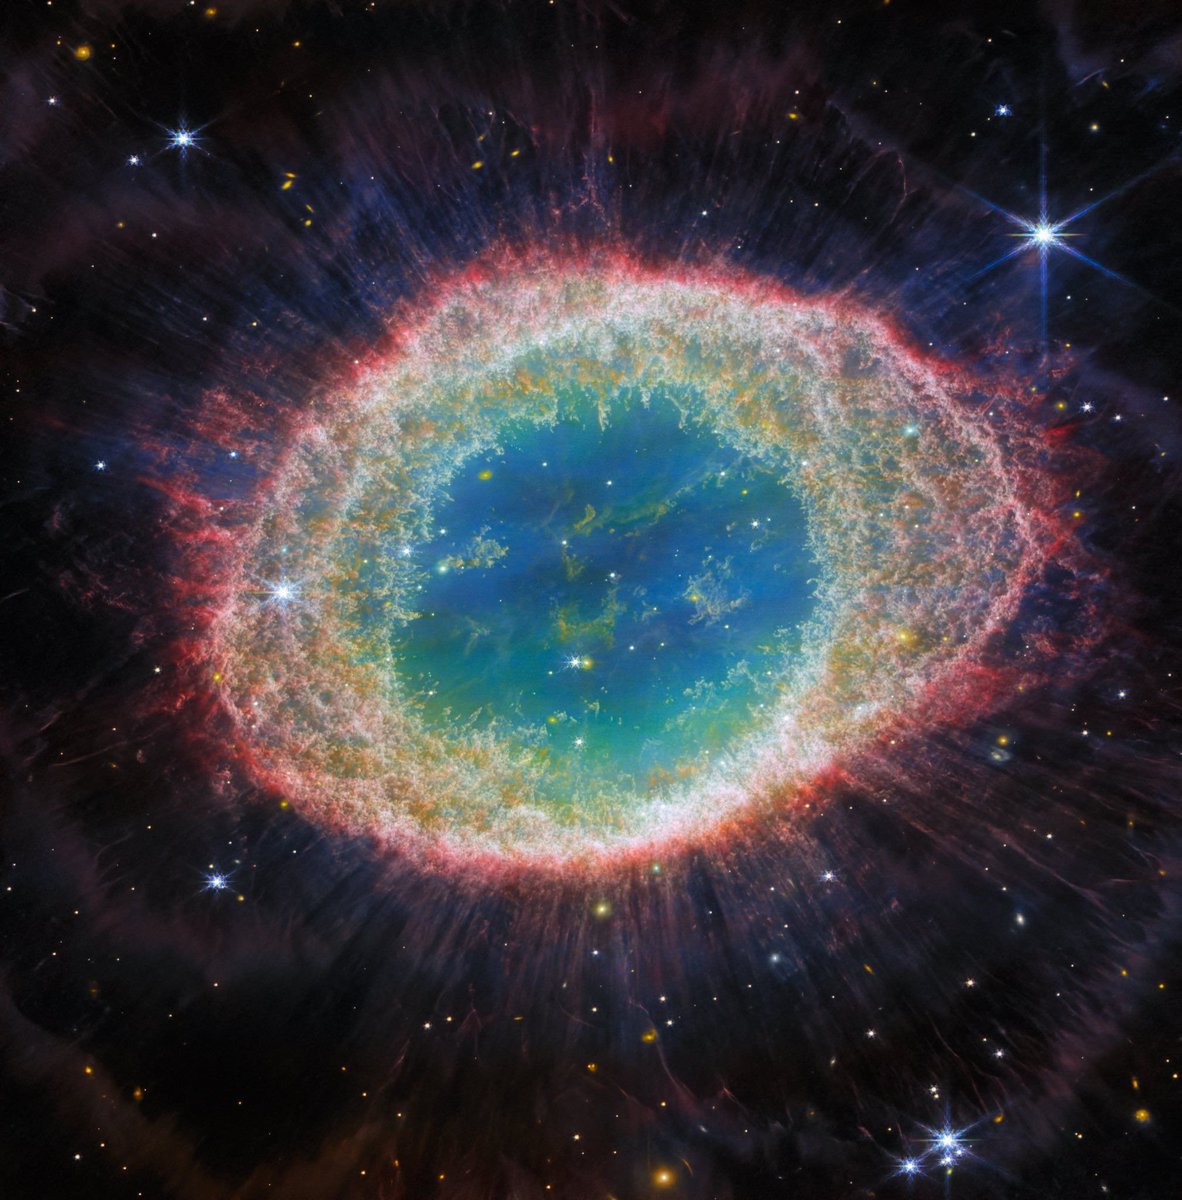 The Ring Nebula from the James Webb Space Telescope